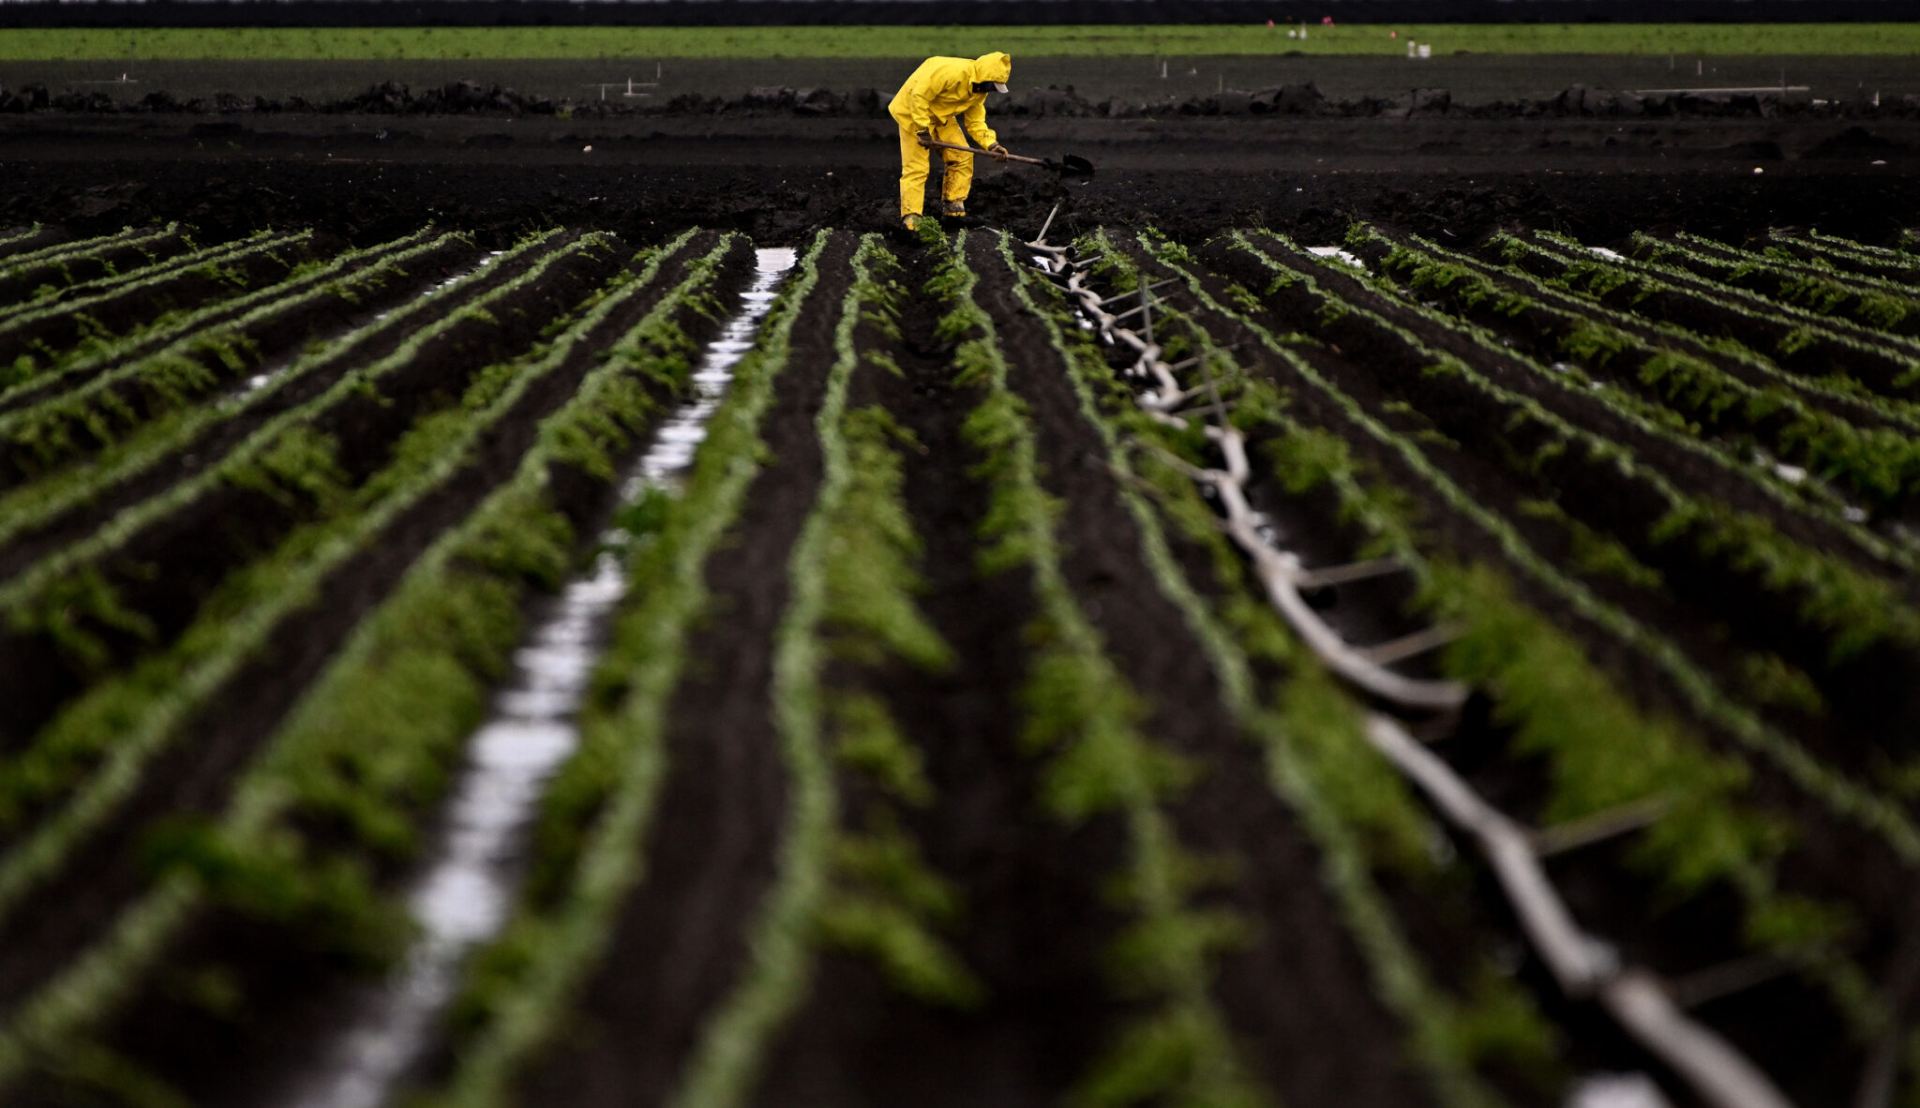 “California Pesticide Regulators’ Lax Oversight Violates Civil Rights Laws, Coalition Charges” – excellent coverage of report co-authored by Dr. Gregg Macey, Director of the Center for Land, Environment & Natural Resources, by Inside Climate News.